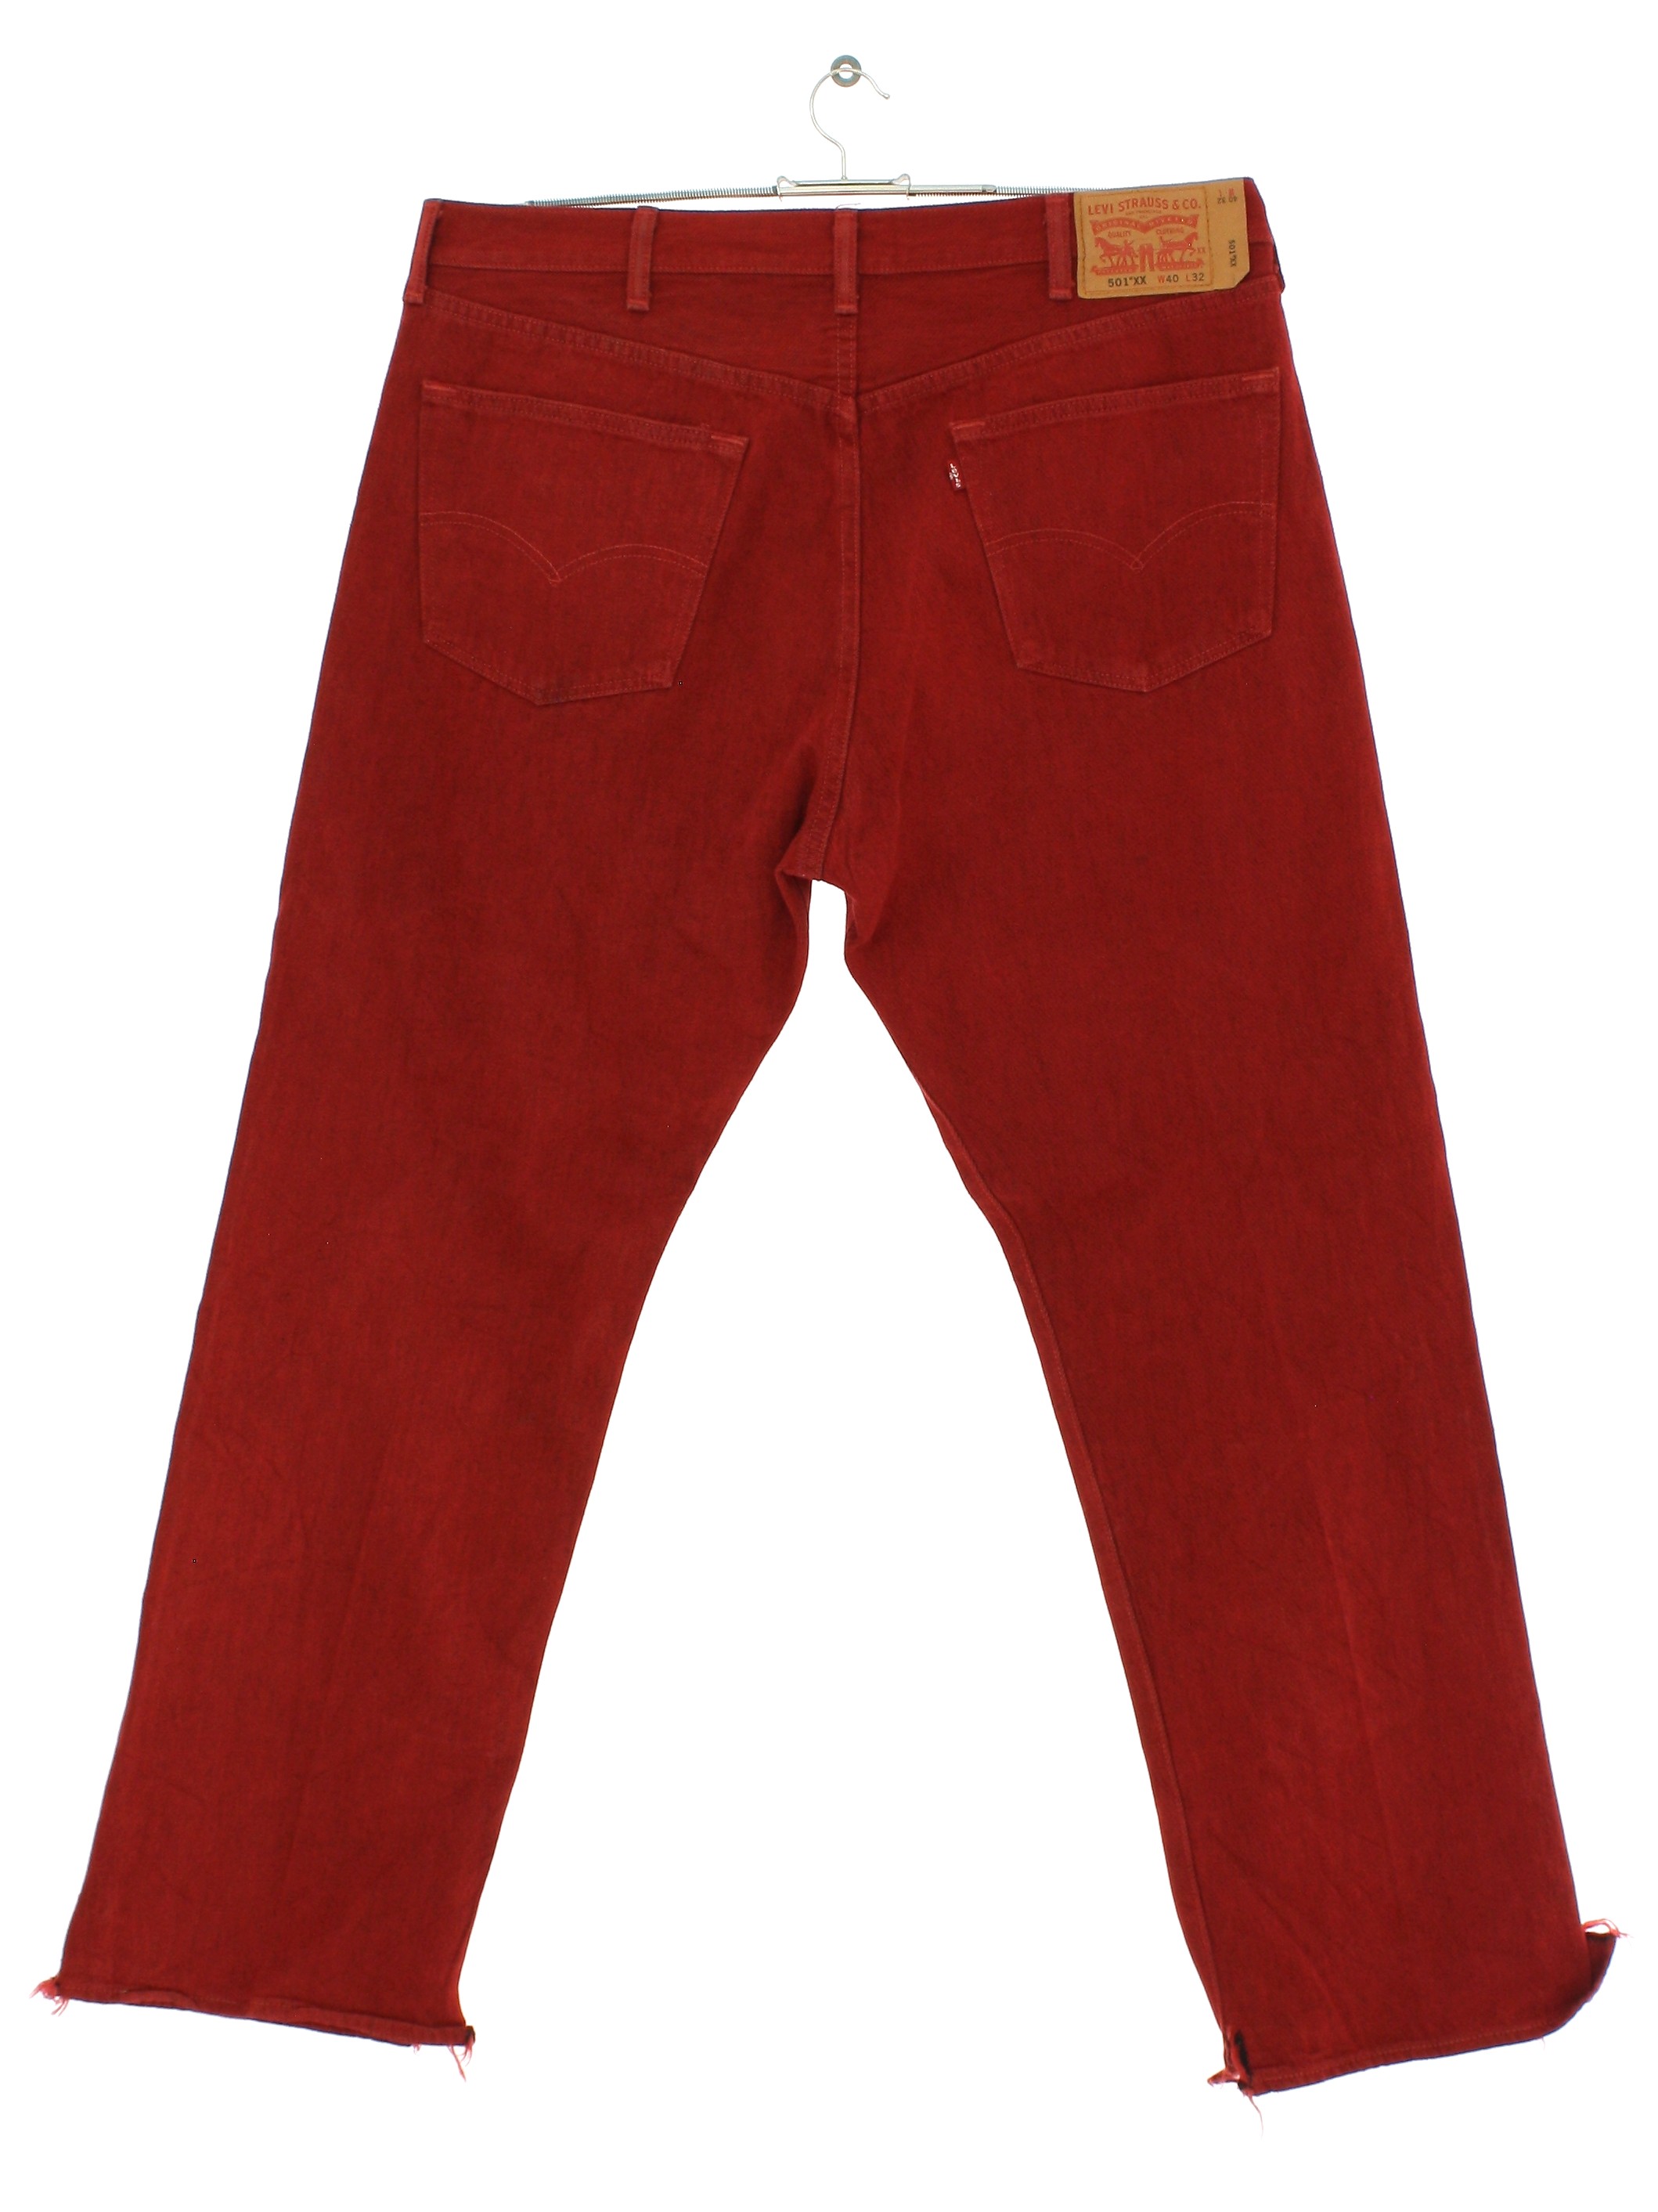 Pants: 90s -Levis 501xx- Mens worn and distressed red cotton denim denim  jeans pants with button fly closure. Five pocket style - front scoop  pockets with single coin pocket and two rear